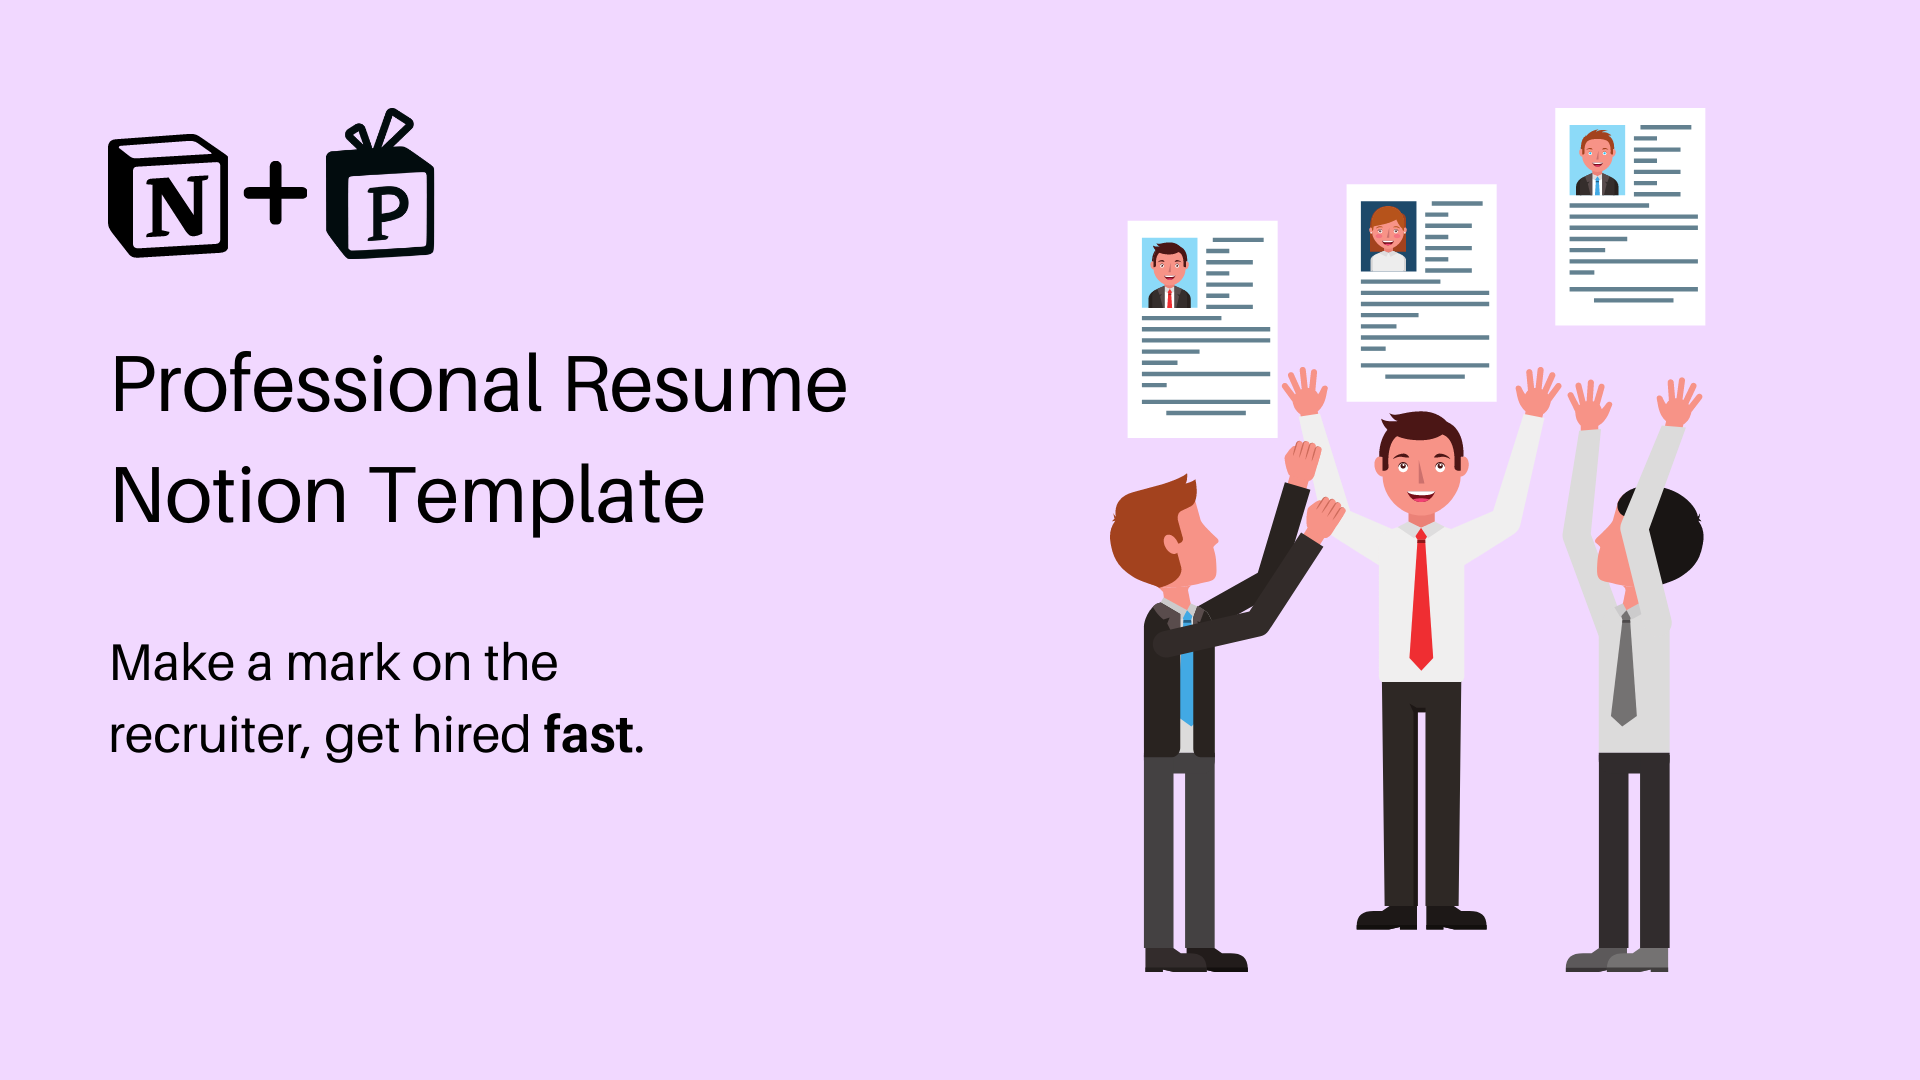 Resume Template | Ready-To-Use Notion CV For Success